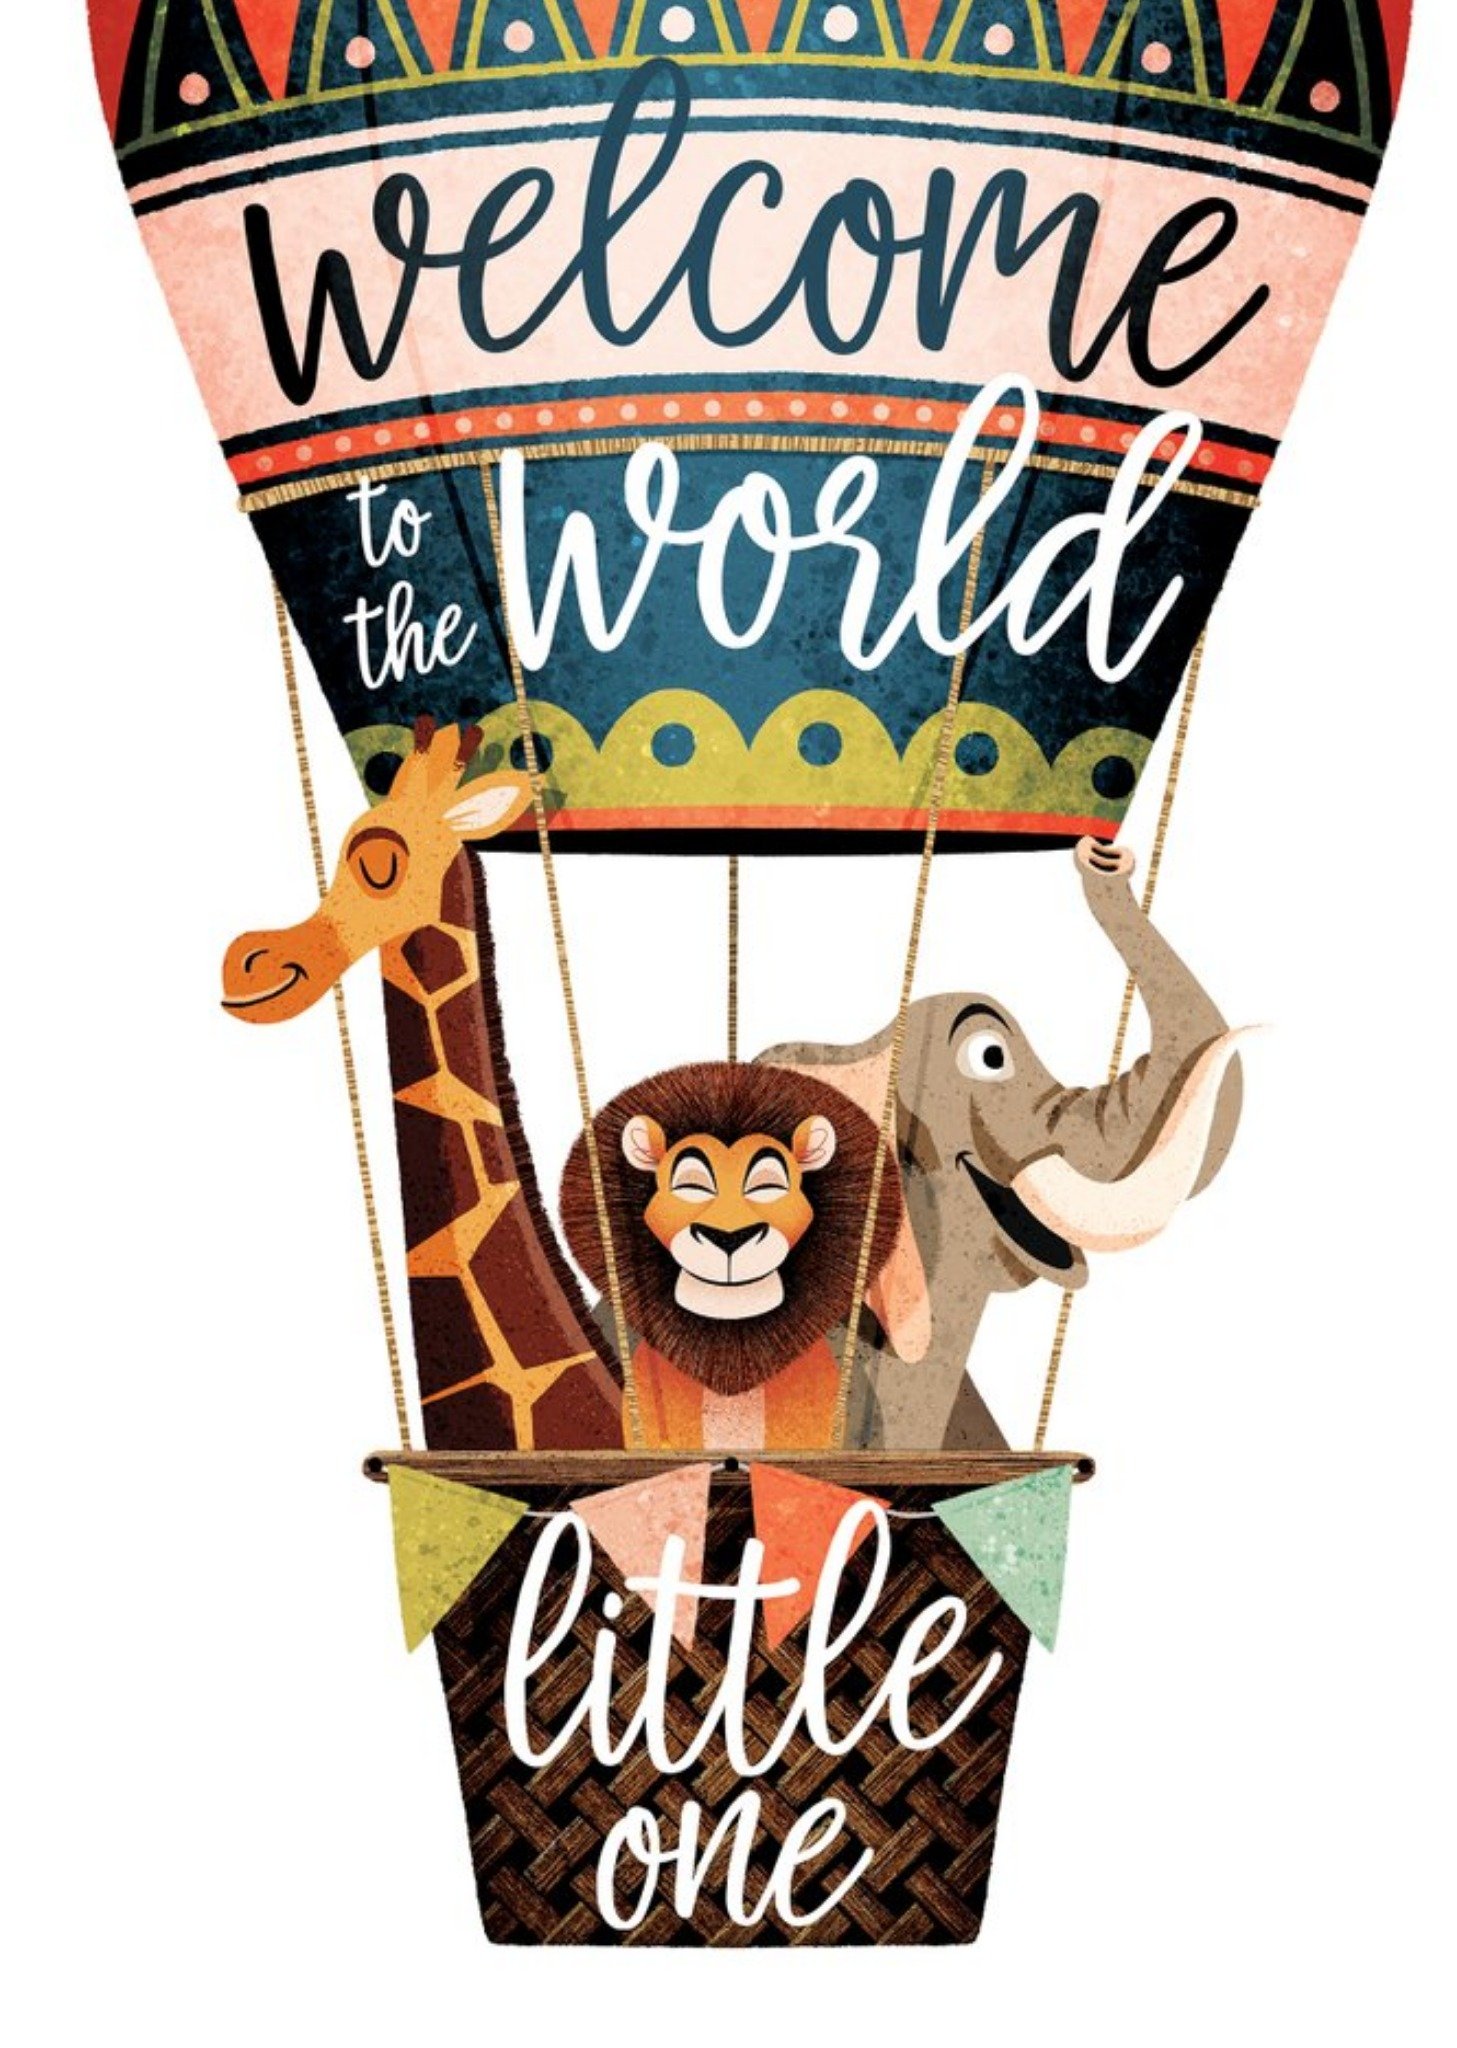 Moonpig Illustrated Hot Air Balloon Full Of Zoo Animals Welcome To The World Little One, Large Card